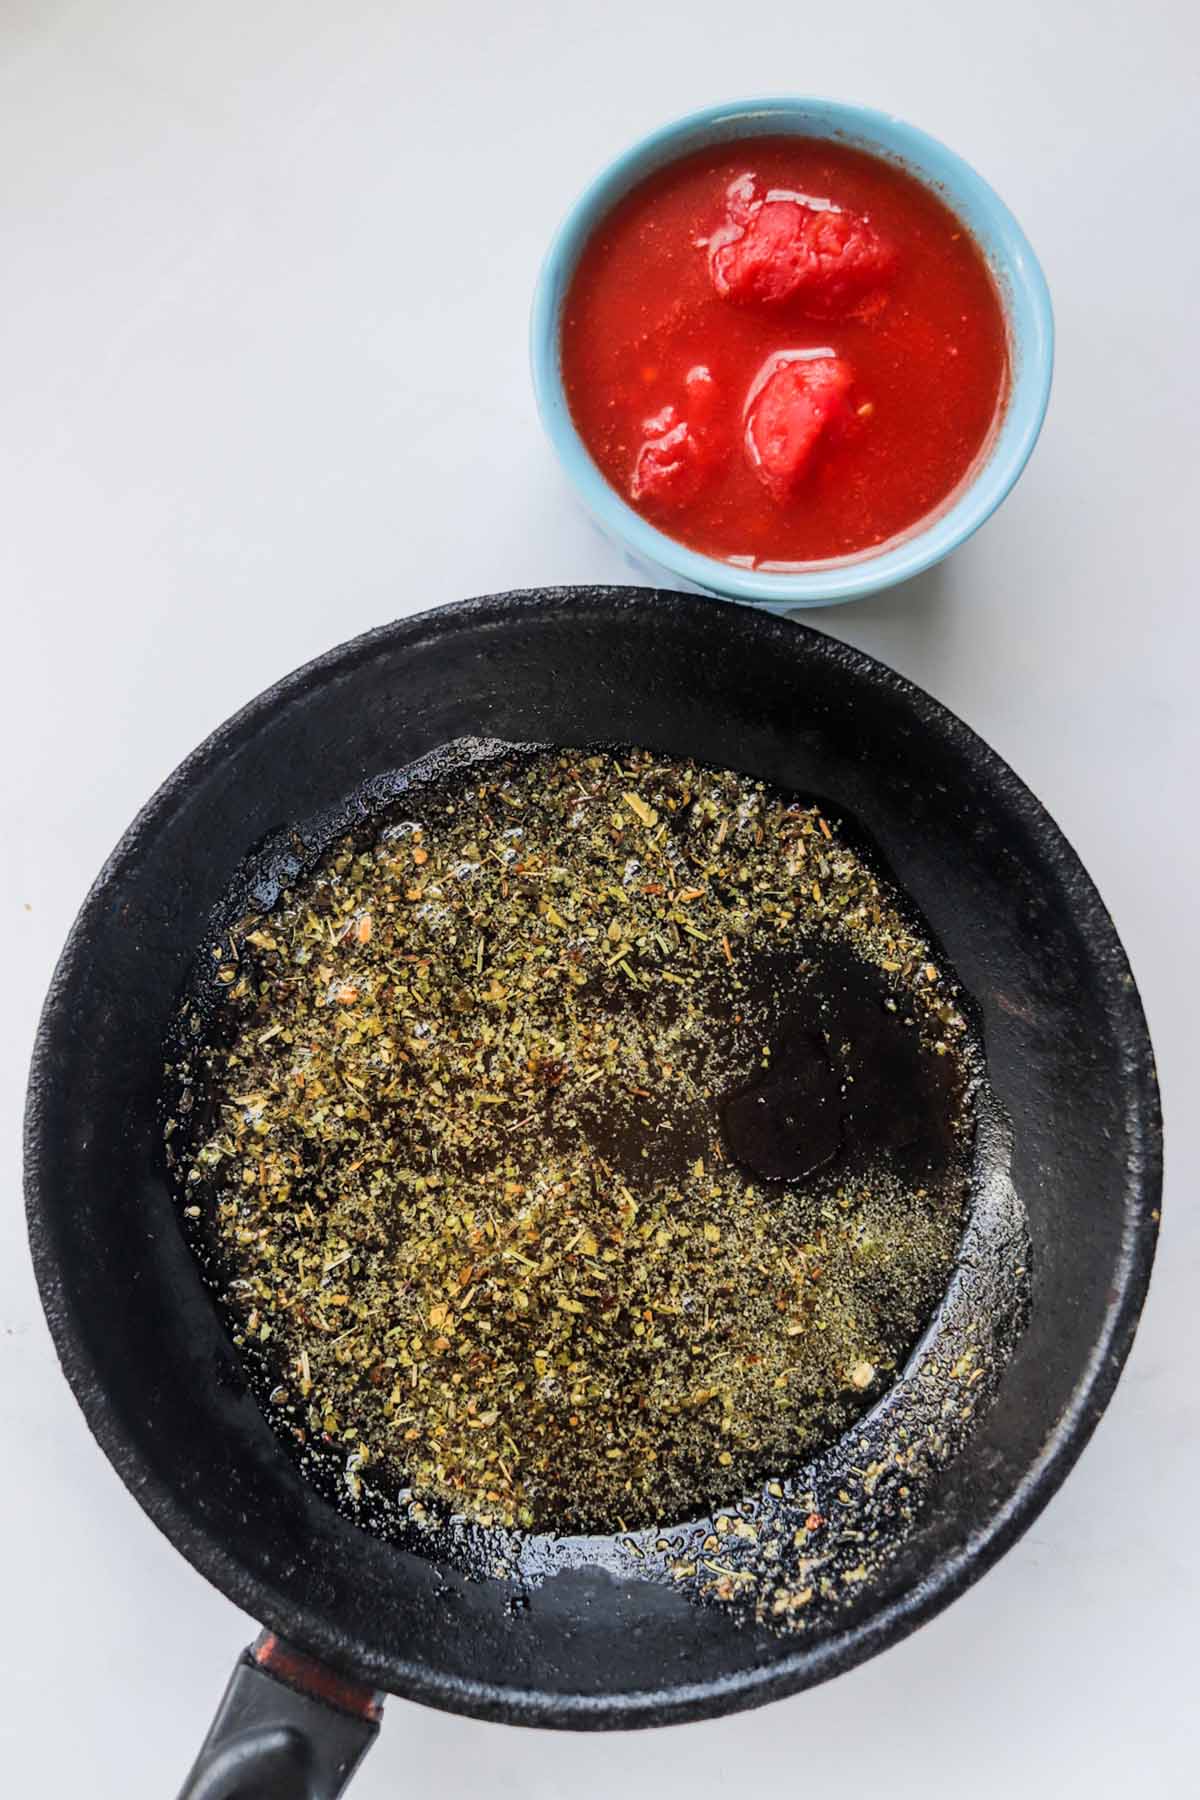 Oil and spices combined in a skillet.